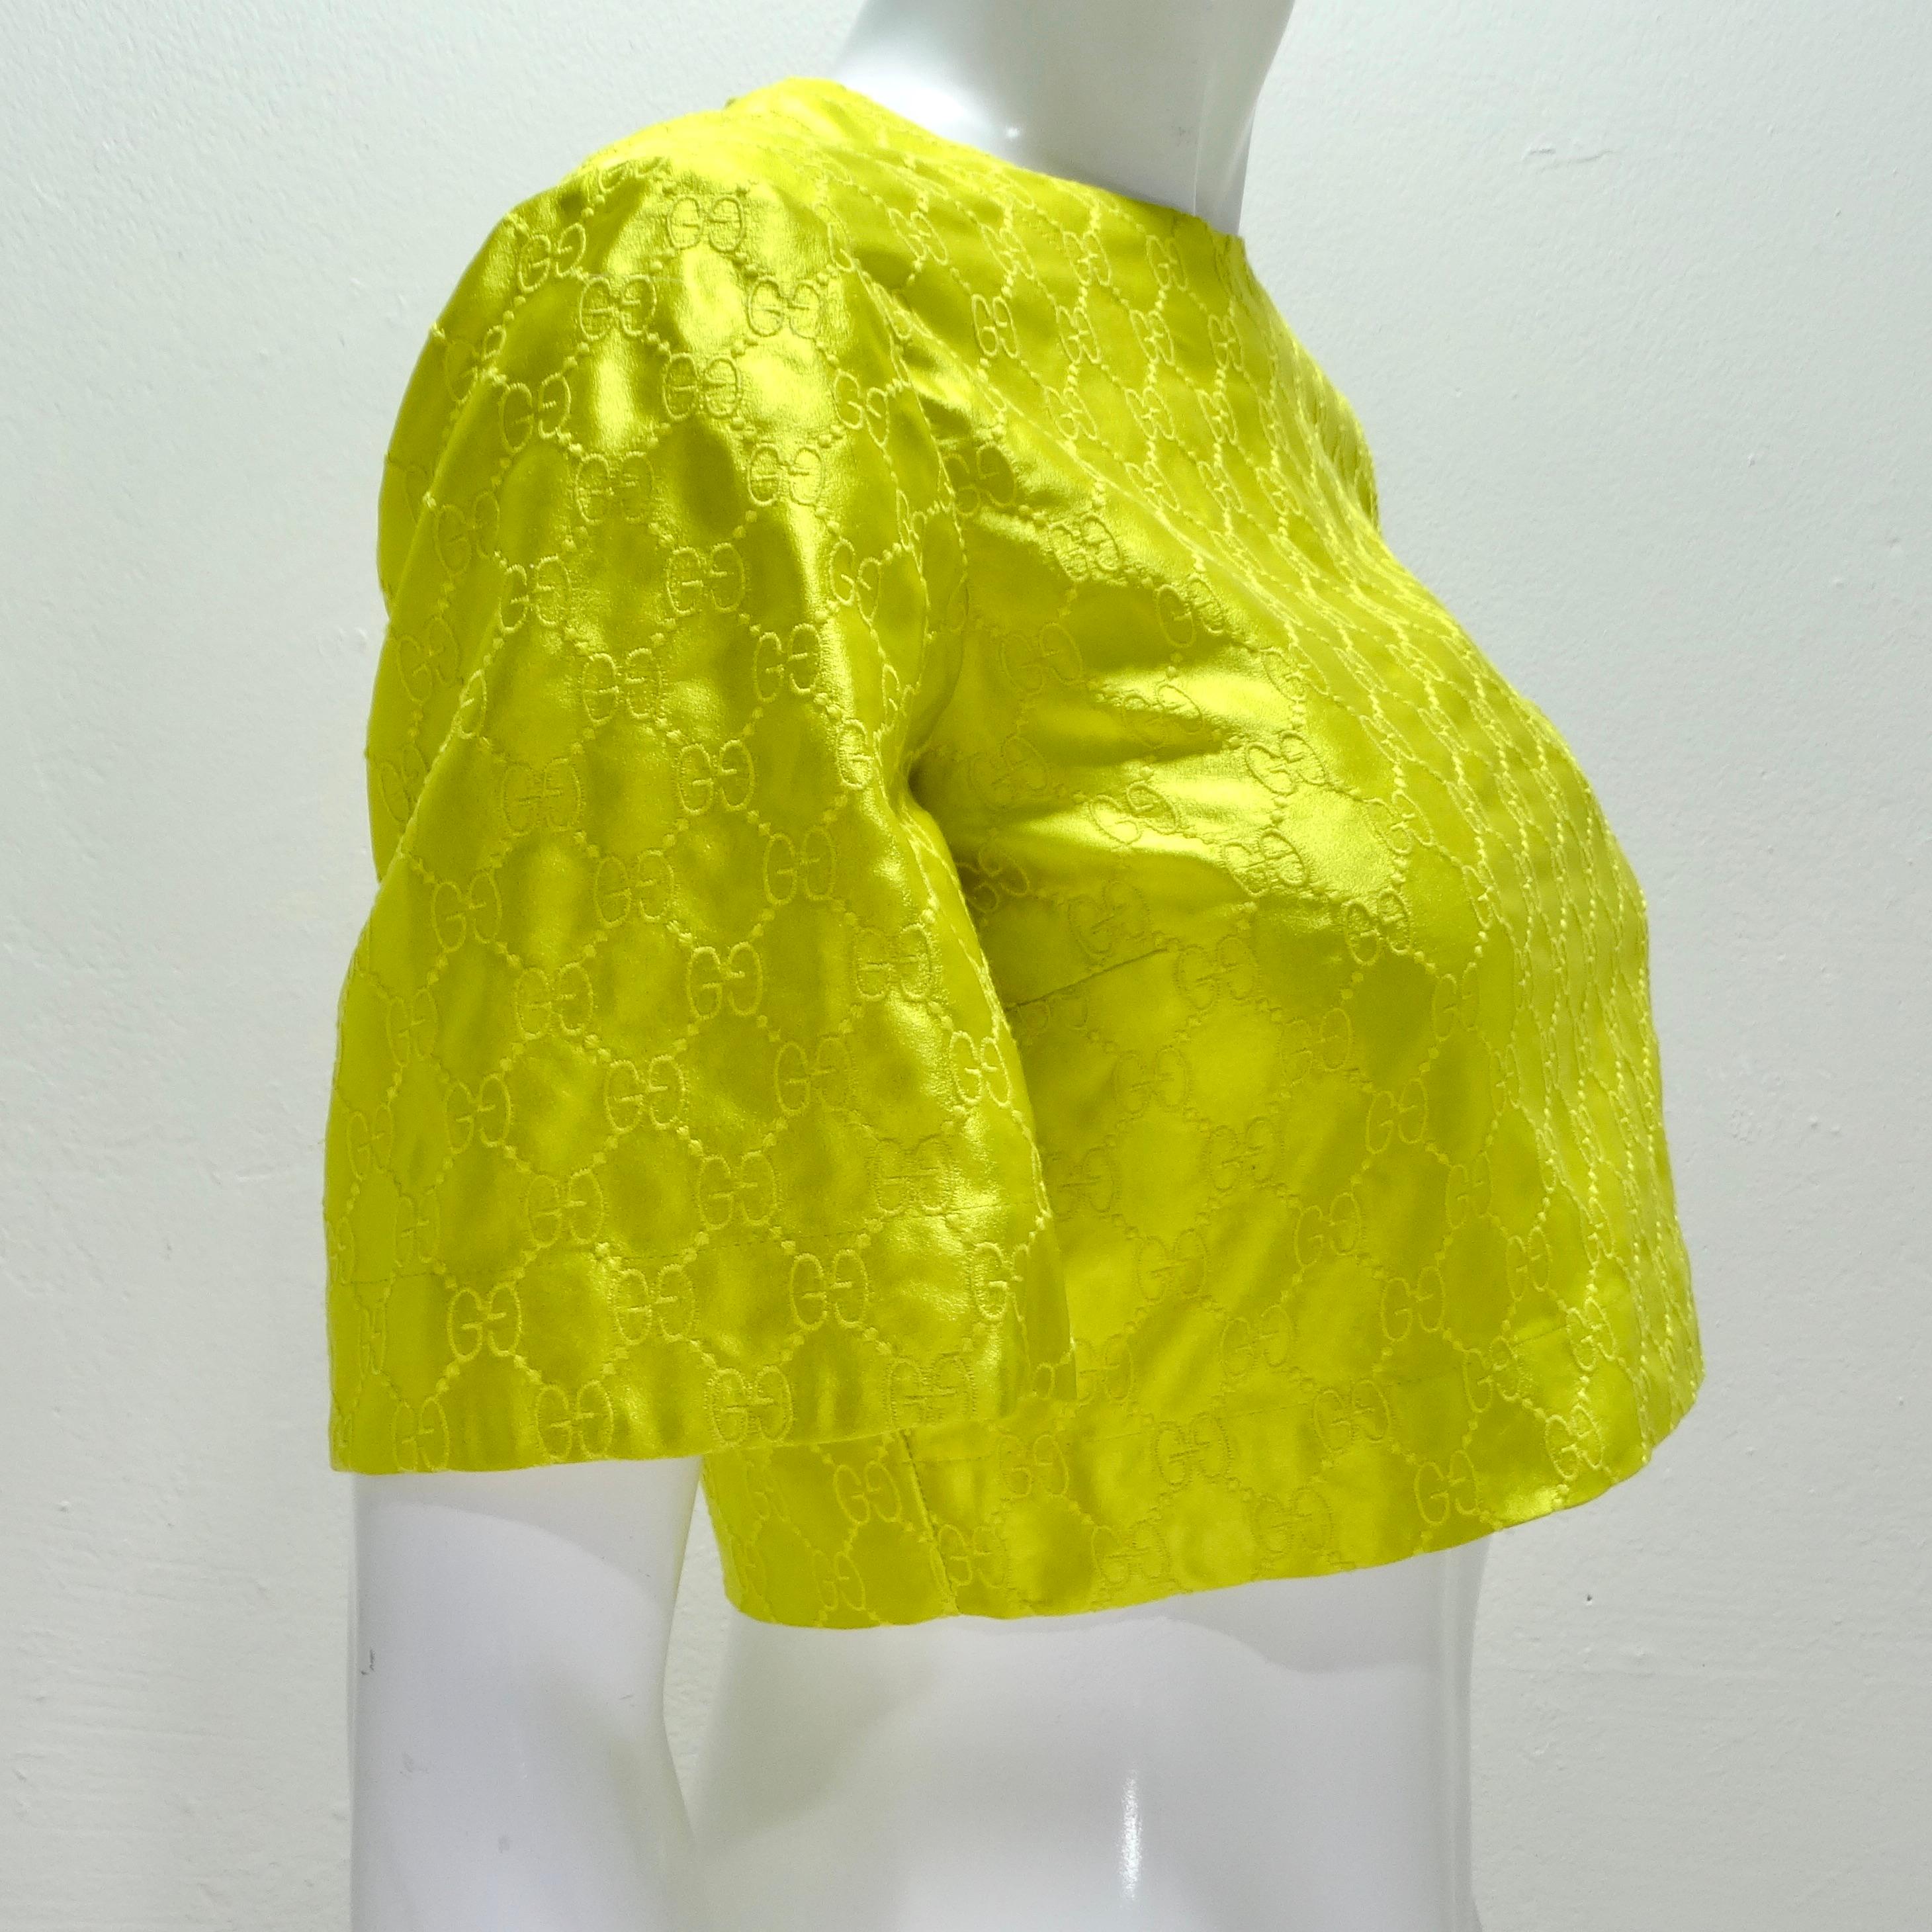 Gucci Yellow Monogram Satin Crop Top In Excellent Condition For Sale In Scottsdale, AZ